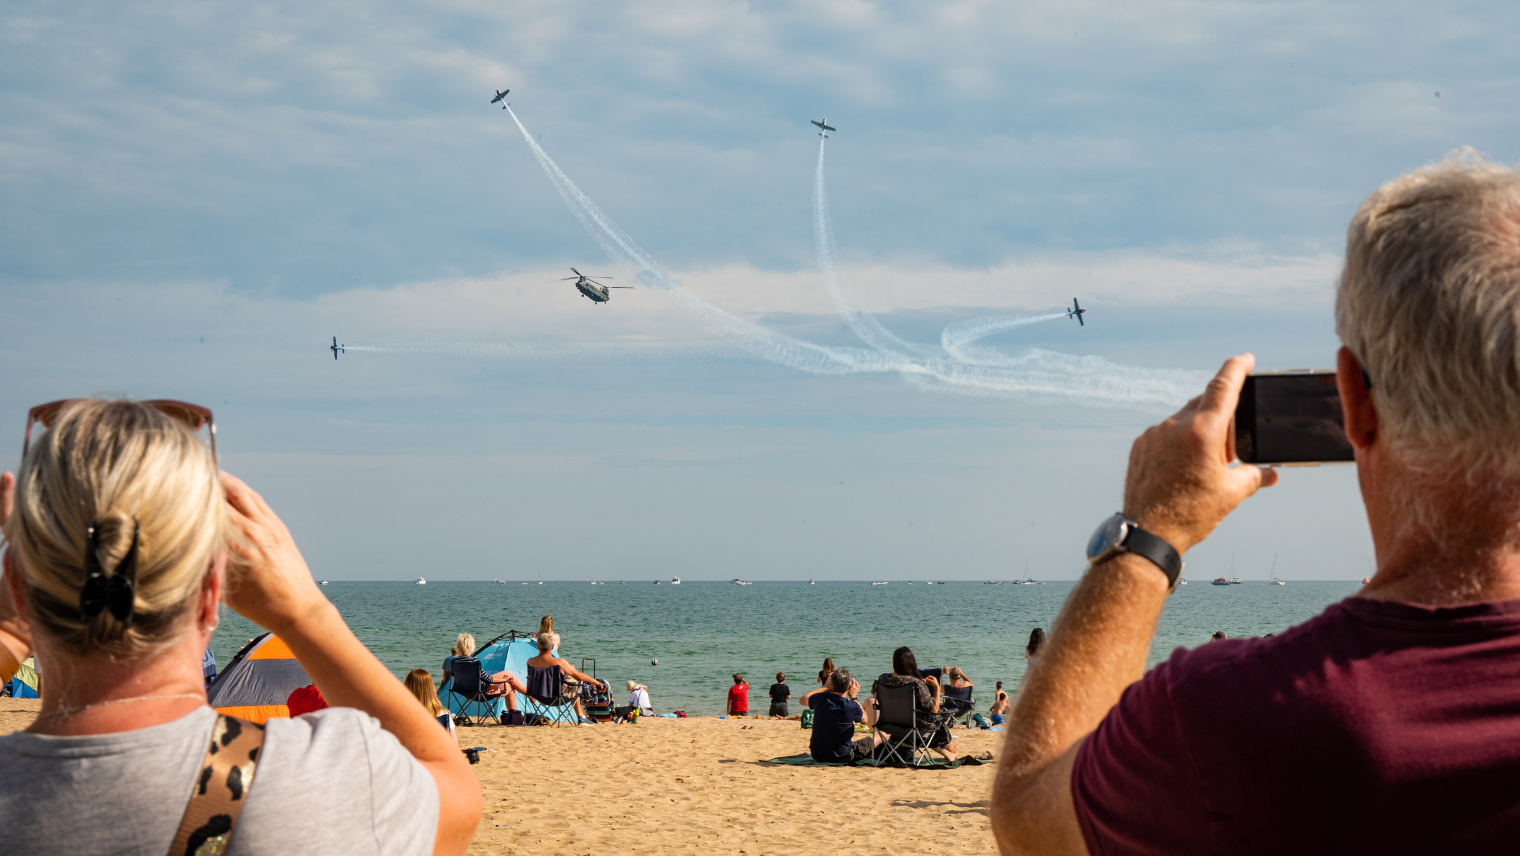 2 people on the beach video recording planes in the air at Bournemouth Air Festival; other groups of people are sitting on the beach watching the show.